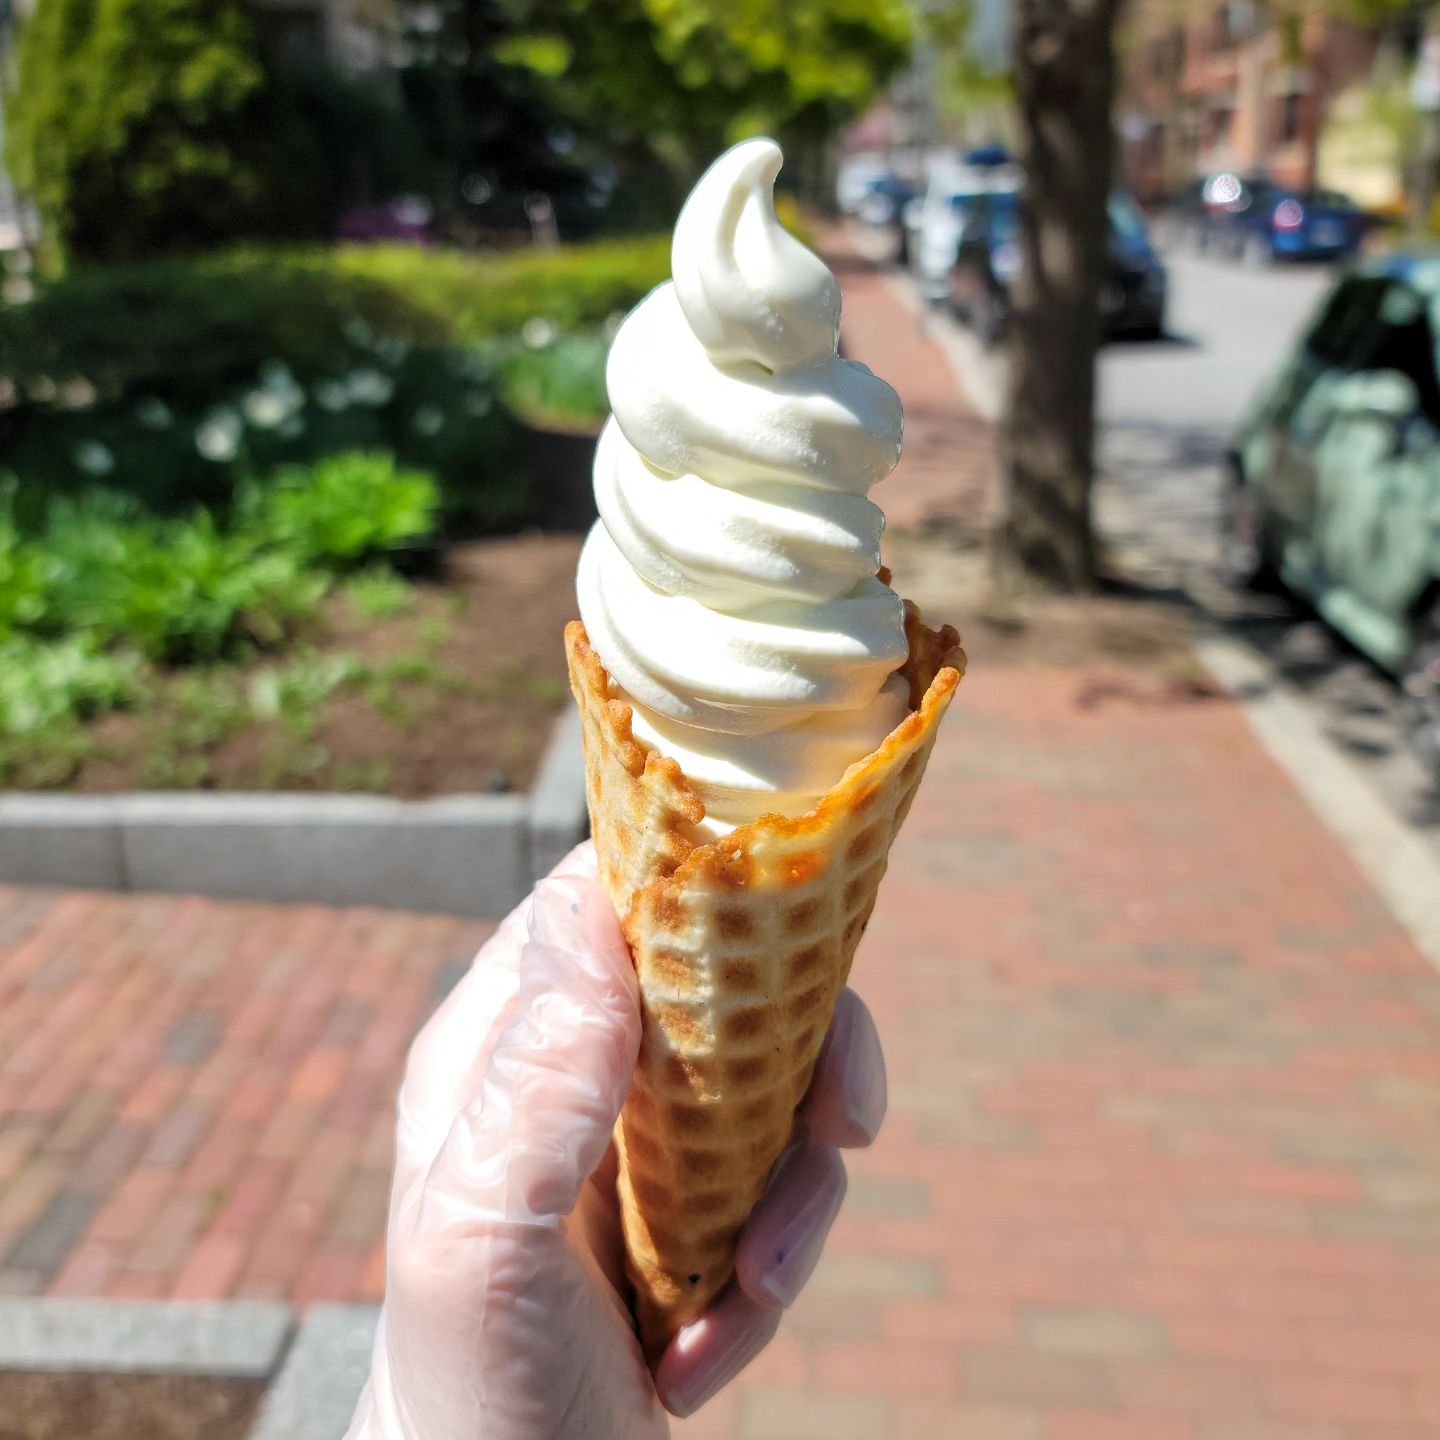 Our soft serve swirl this month is LIME+VANILLA CHEESECAKE!🍦 Made from scratch and with fresh limes (for the Lime side) and vanilla, cream cheese, and lemon juice (for the Vanilla Cheesecake side), this twist is an ultra creamy and tangy twist for t